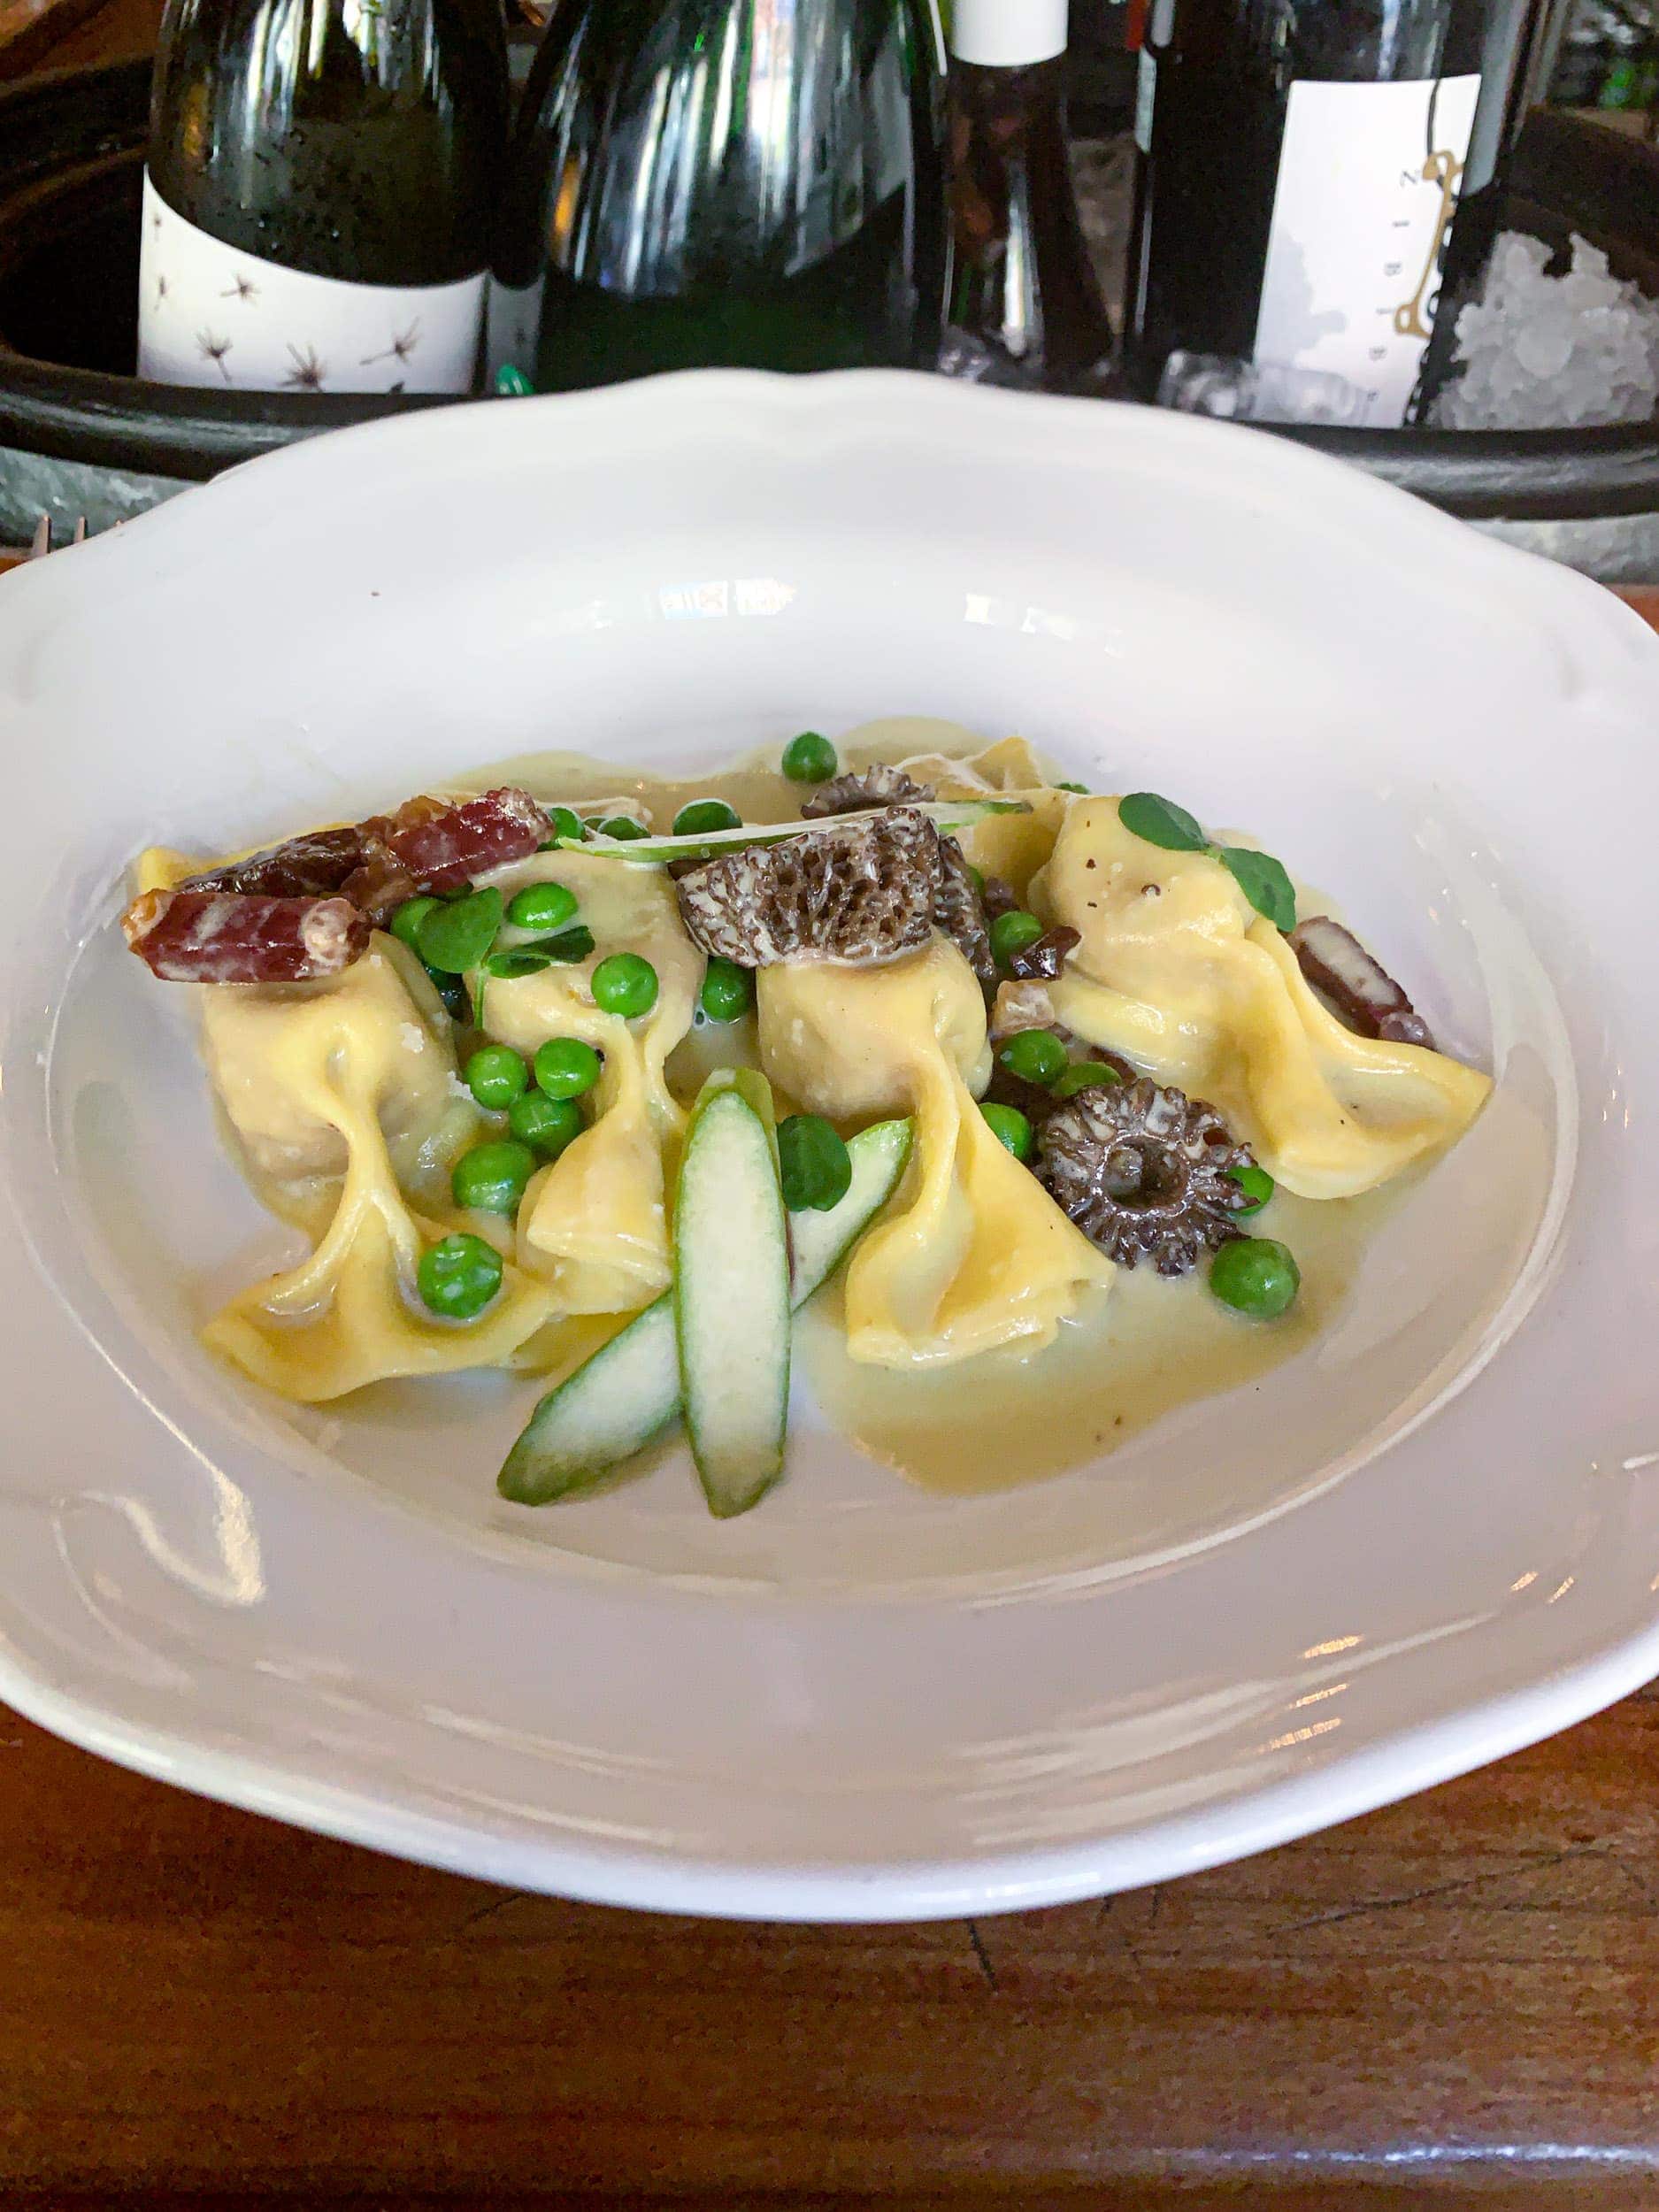 Caramelized onion and beef-stuffed pasta in asparagus butter